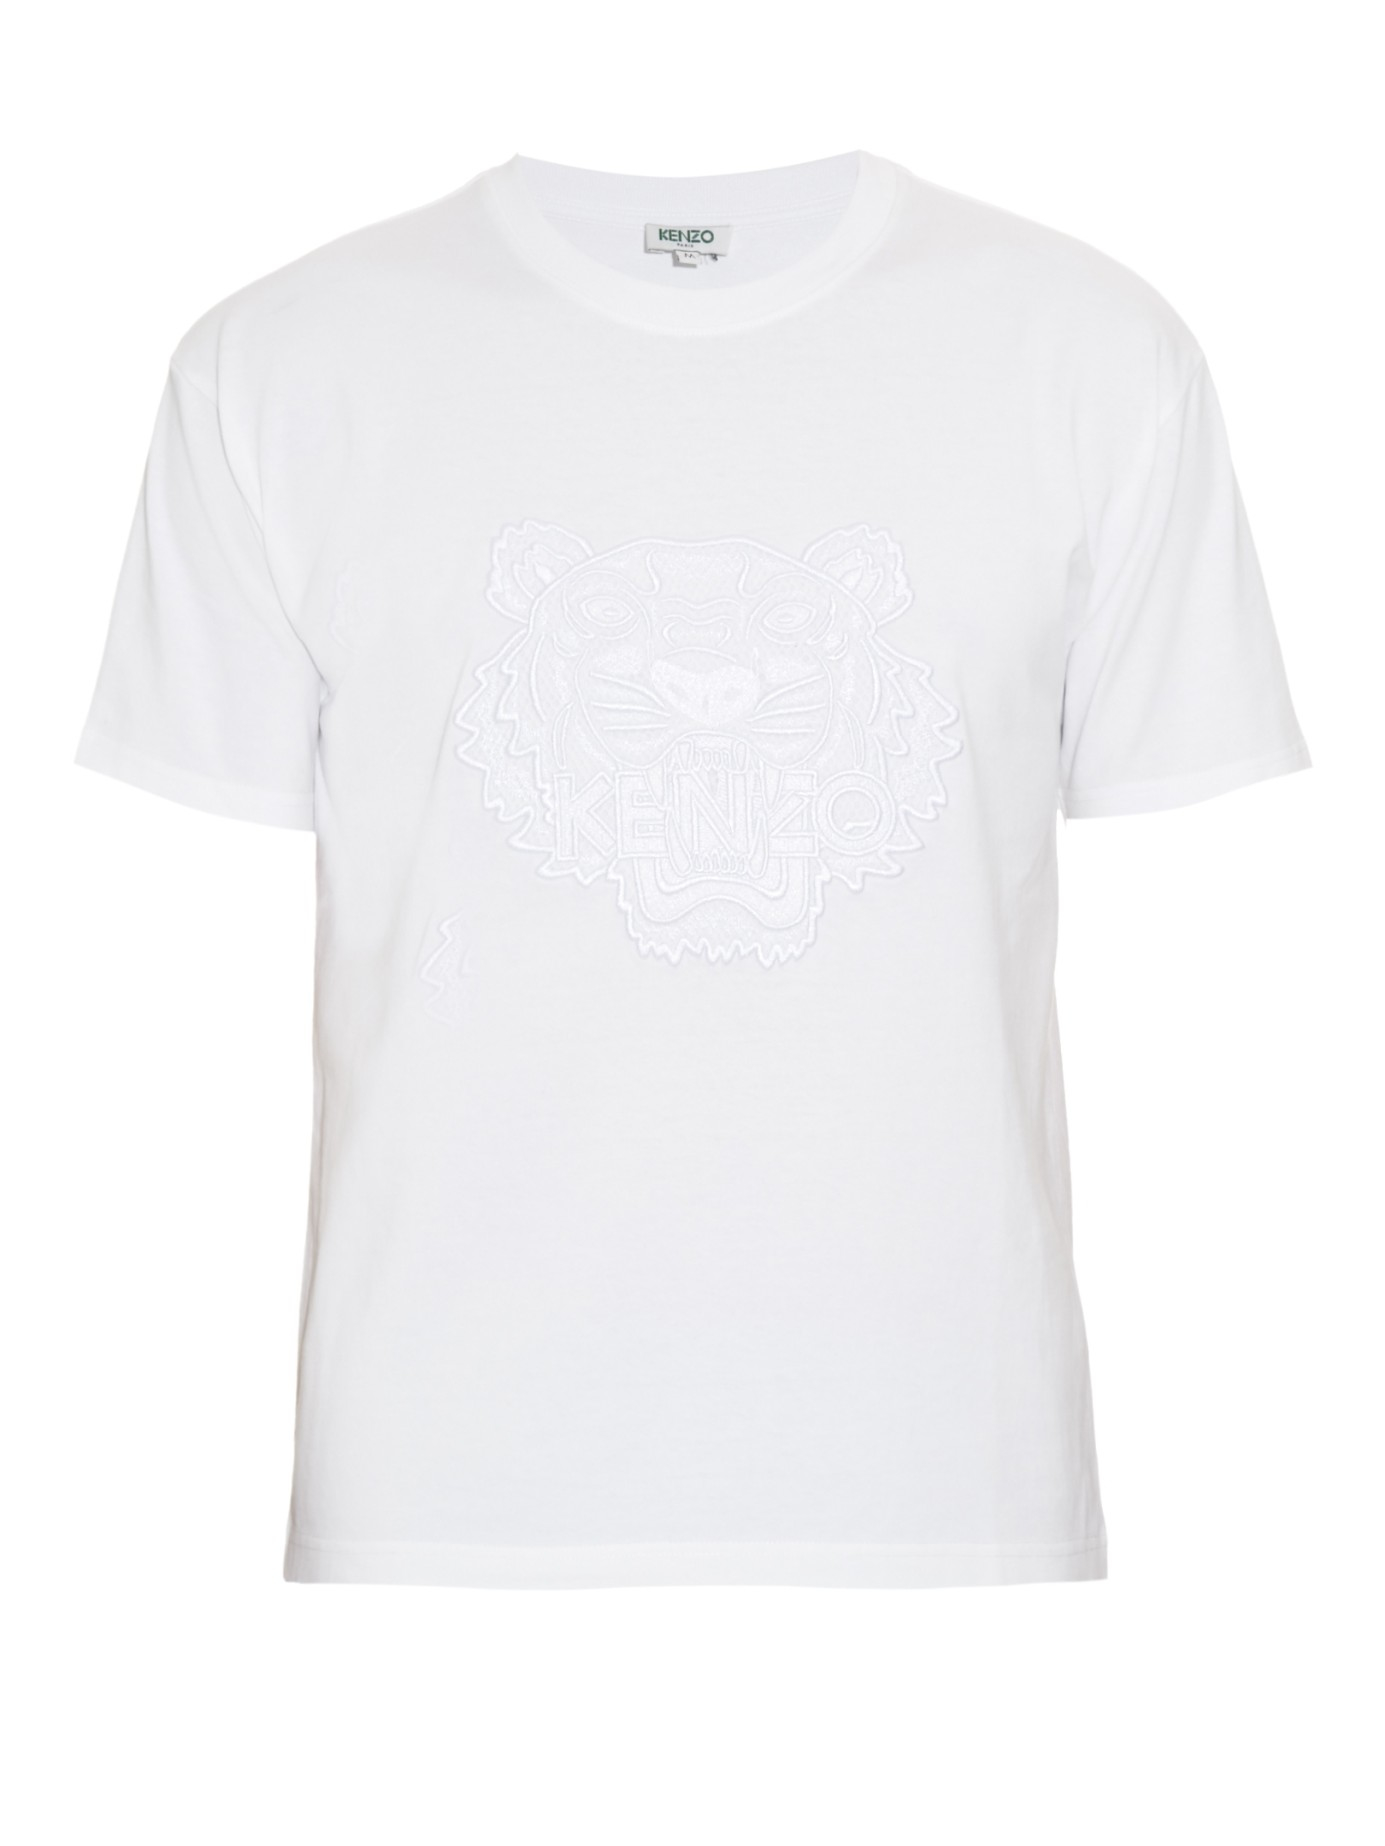 KENZO Embroidered Tiger-print Cotton T-shirt in White for Men | Lyst